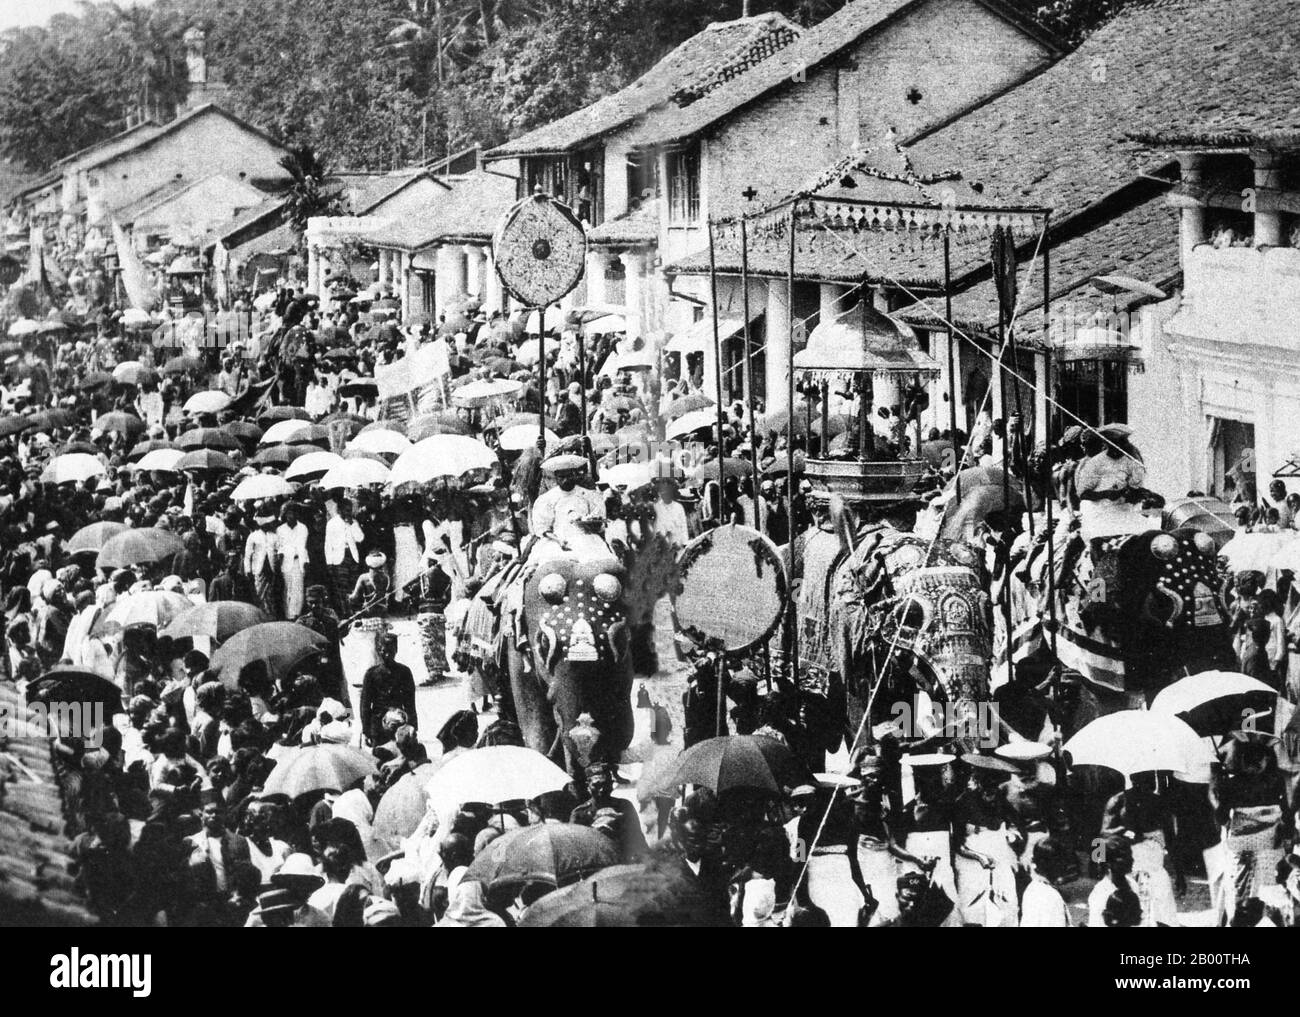 Sri Lanka: Esala Perahera procession in Kandy, c. 1910.  The Esala Perahera or ‘Festival of the Tooth’ held annually in Kandy is believed to be a fusion of two separate but interconnected ‘Perahera’ (Processions), The Esala and Dalada. The Esala Perahera which is thought to date back to the 3rd century BCE, was a ritual enacted to request the gods for rainfall. The Dalada Perahera is believed to have begun when the Sacred Tooth Relic of the Buddha was brought to Sri Lanka from India during the 4th Century CE. Stock Photo